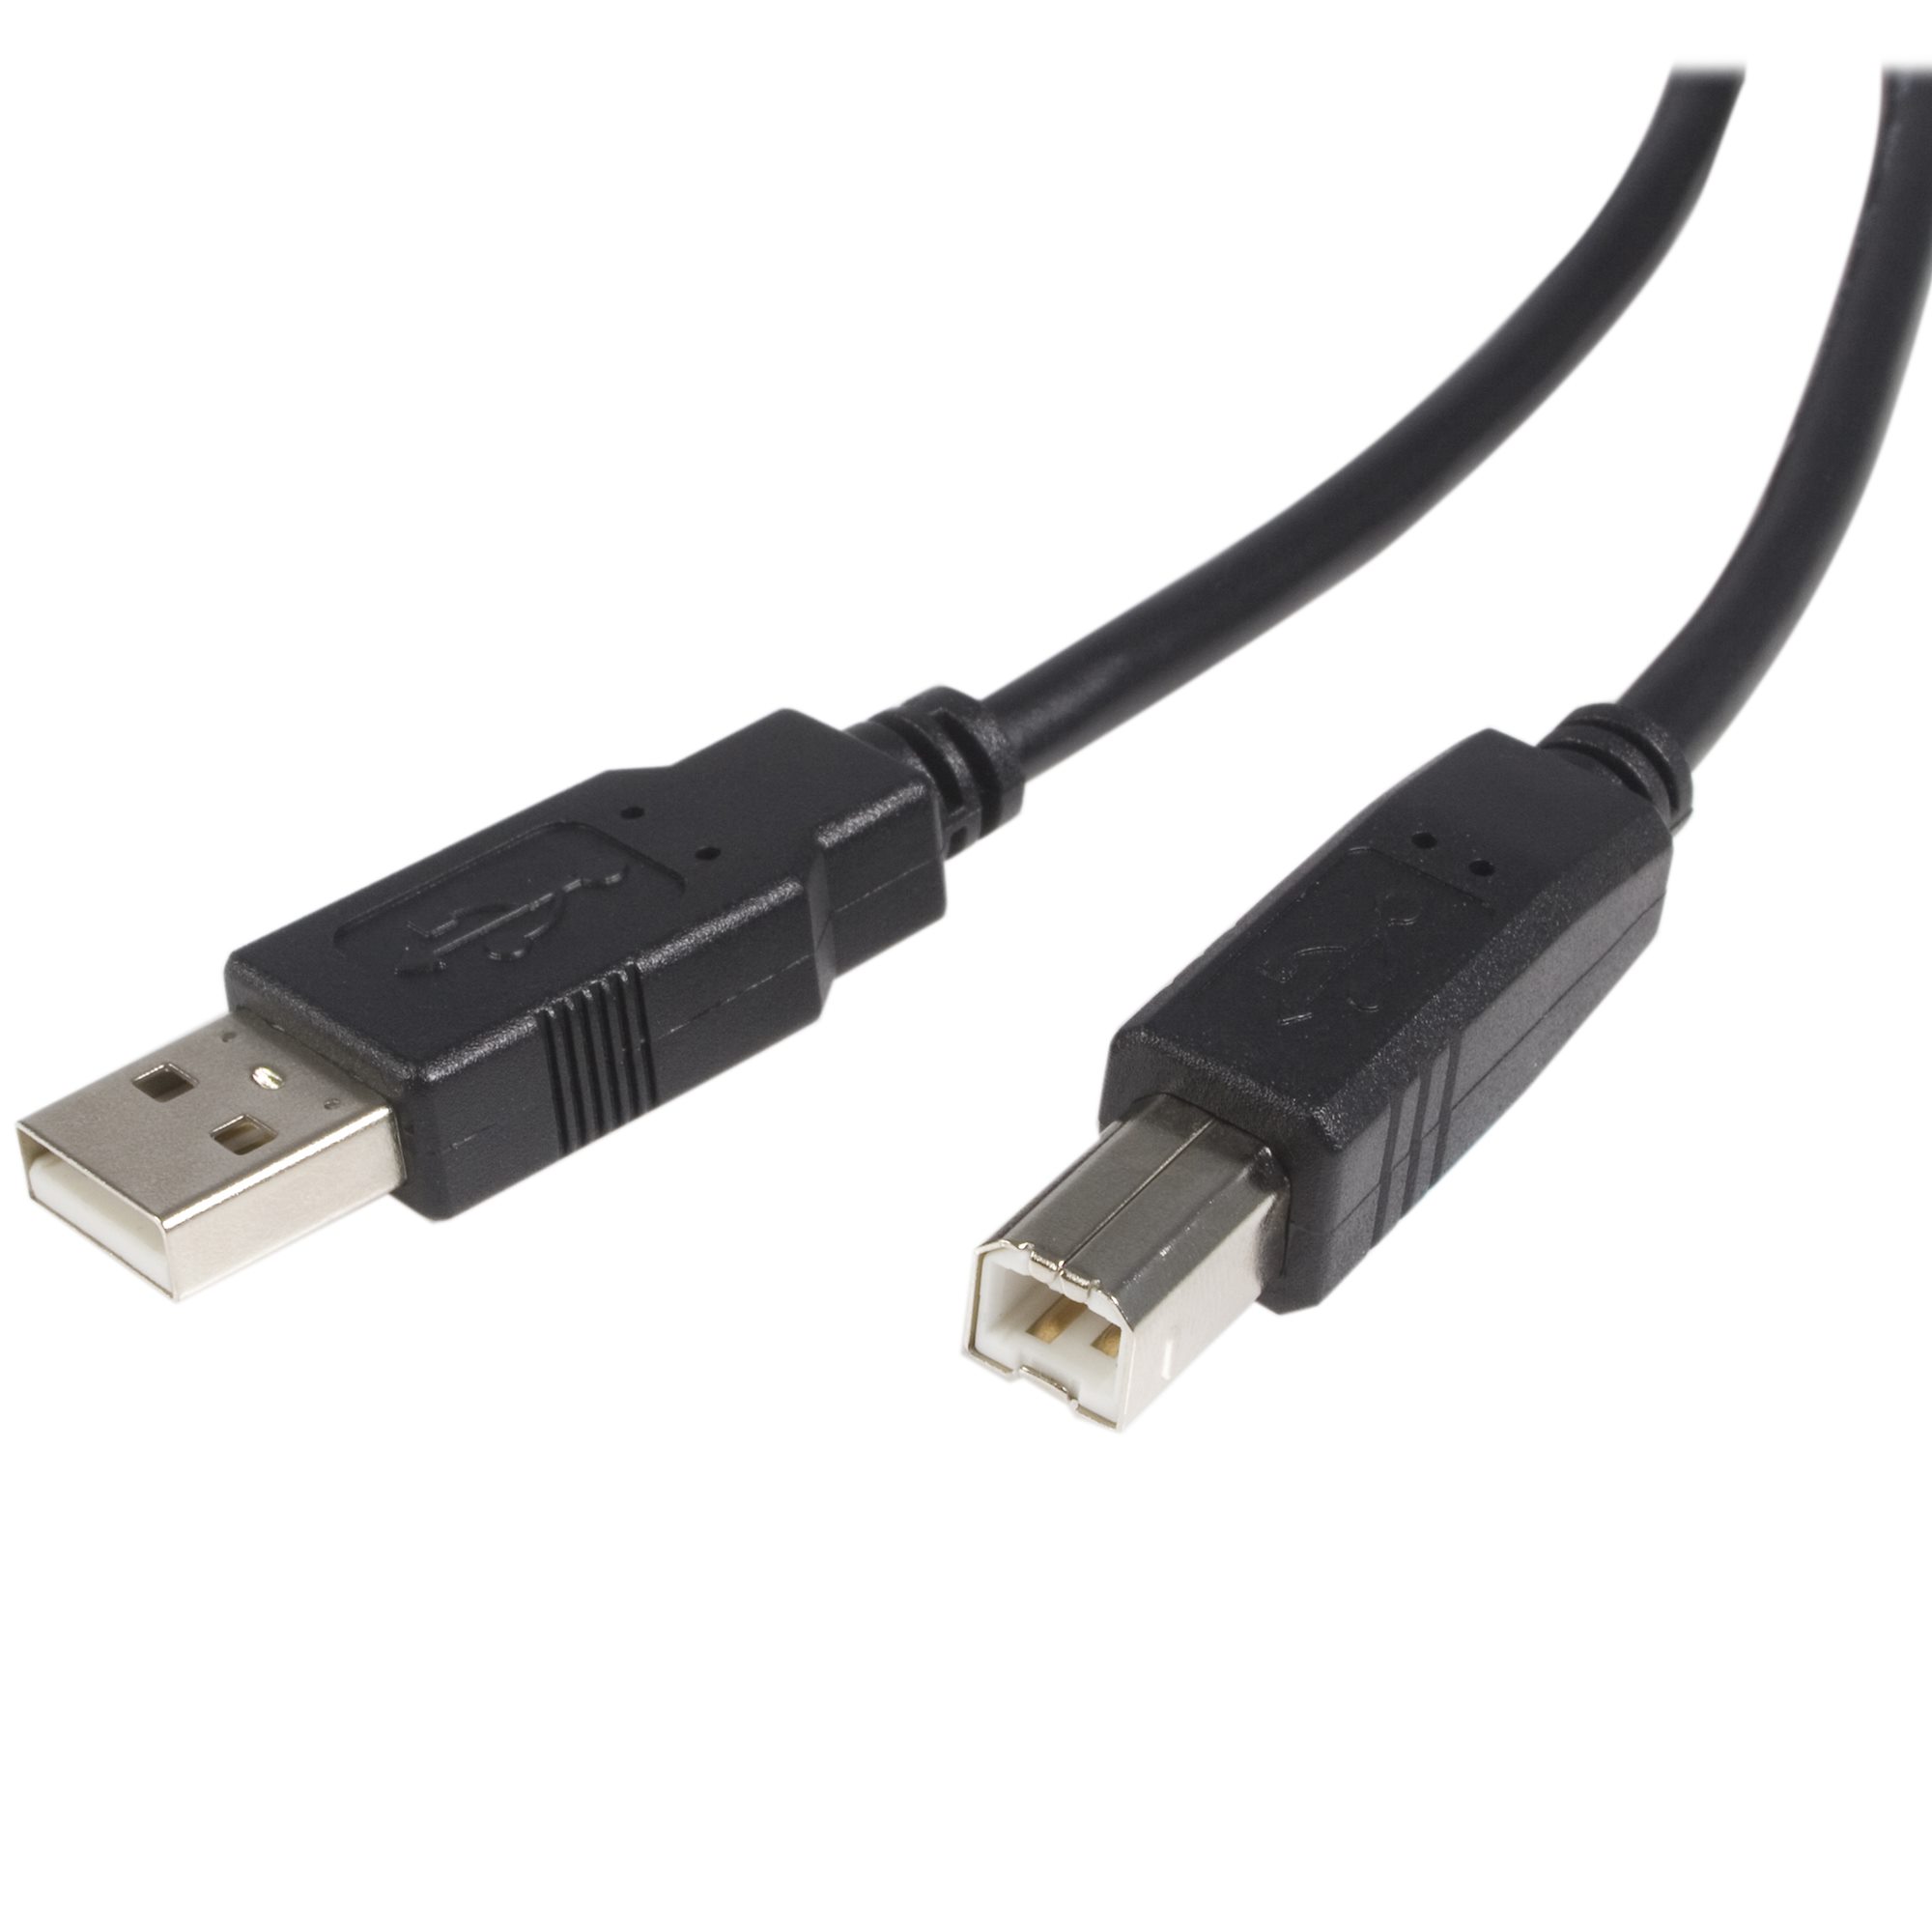 AMBM Printer Cable Cord Braided 6ft 10ft 15ft USB 2.0 Type A Male to B Male 